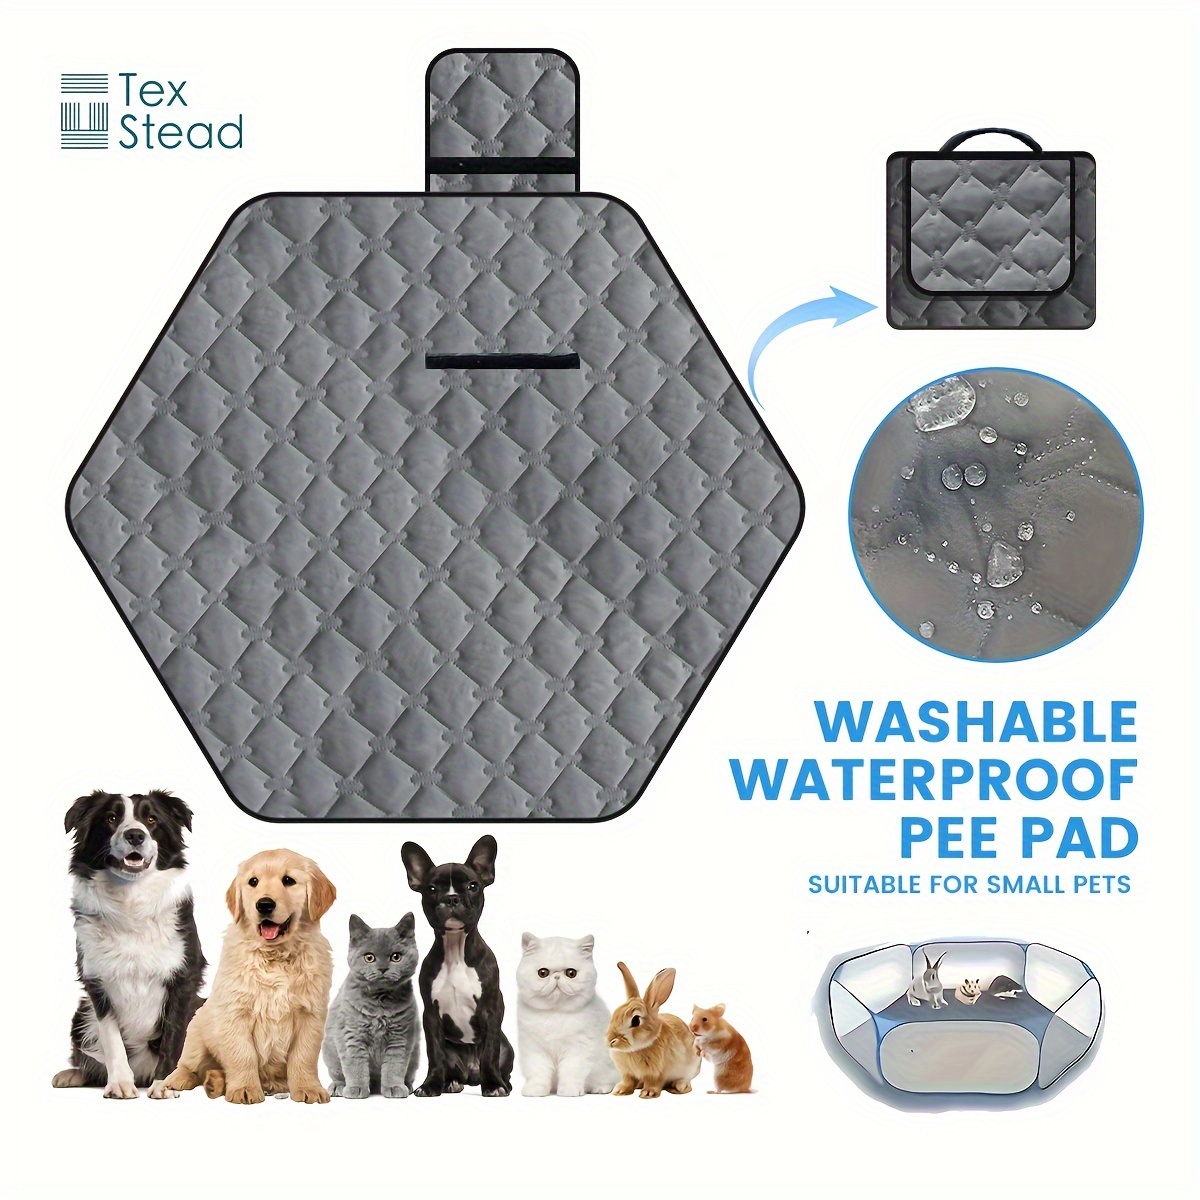 

1pc Washable Liner For Small Animal Playpen, Portable Reusable Guinea Pig Playpen Pad Small Dog Cat Urine Pad Super Absorbent Indoor Waterproof Anti-slip For Kitten, Puppy, Rabbit, Guinea Pig